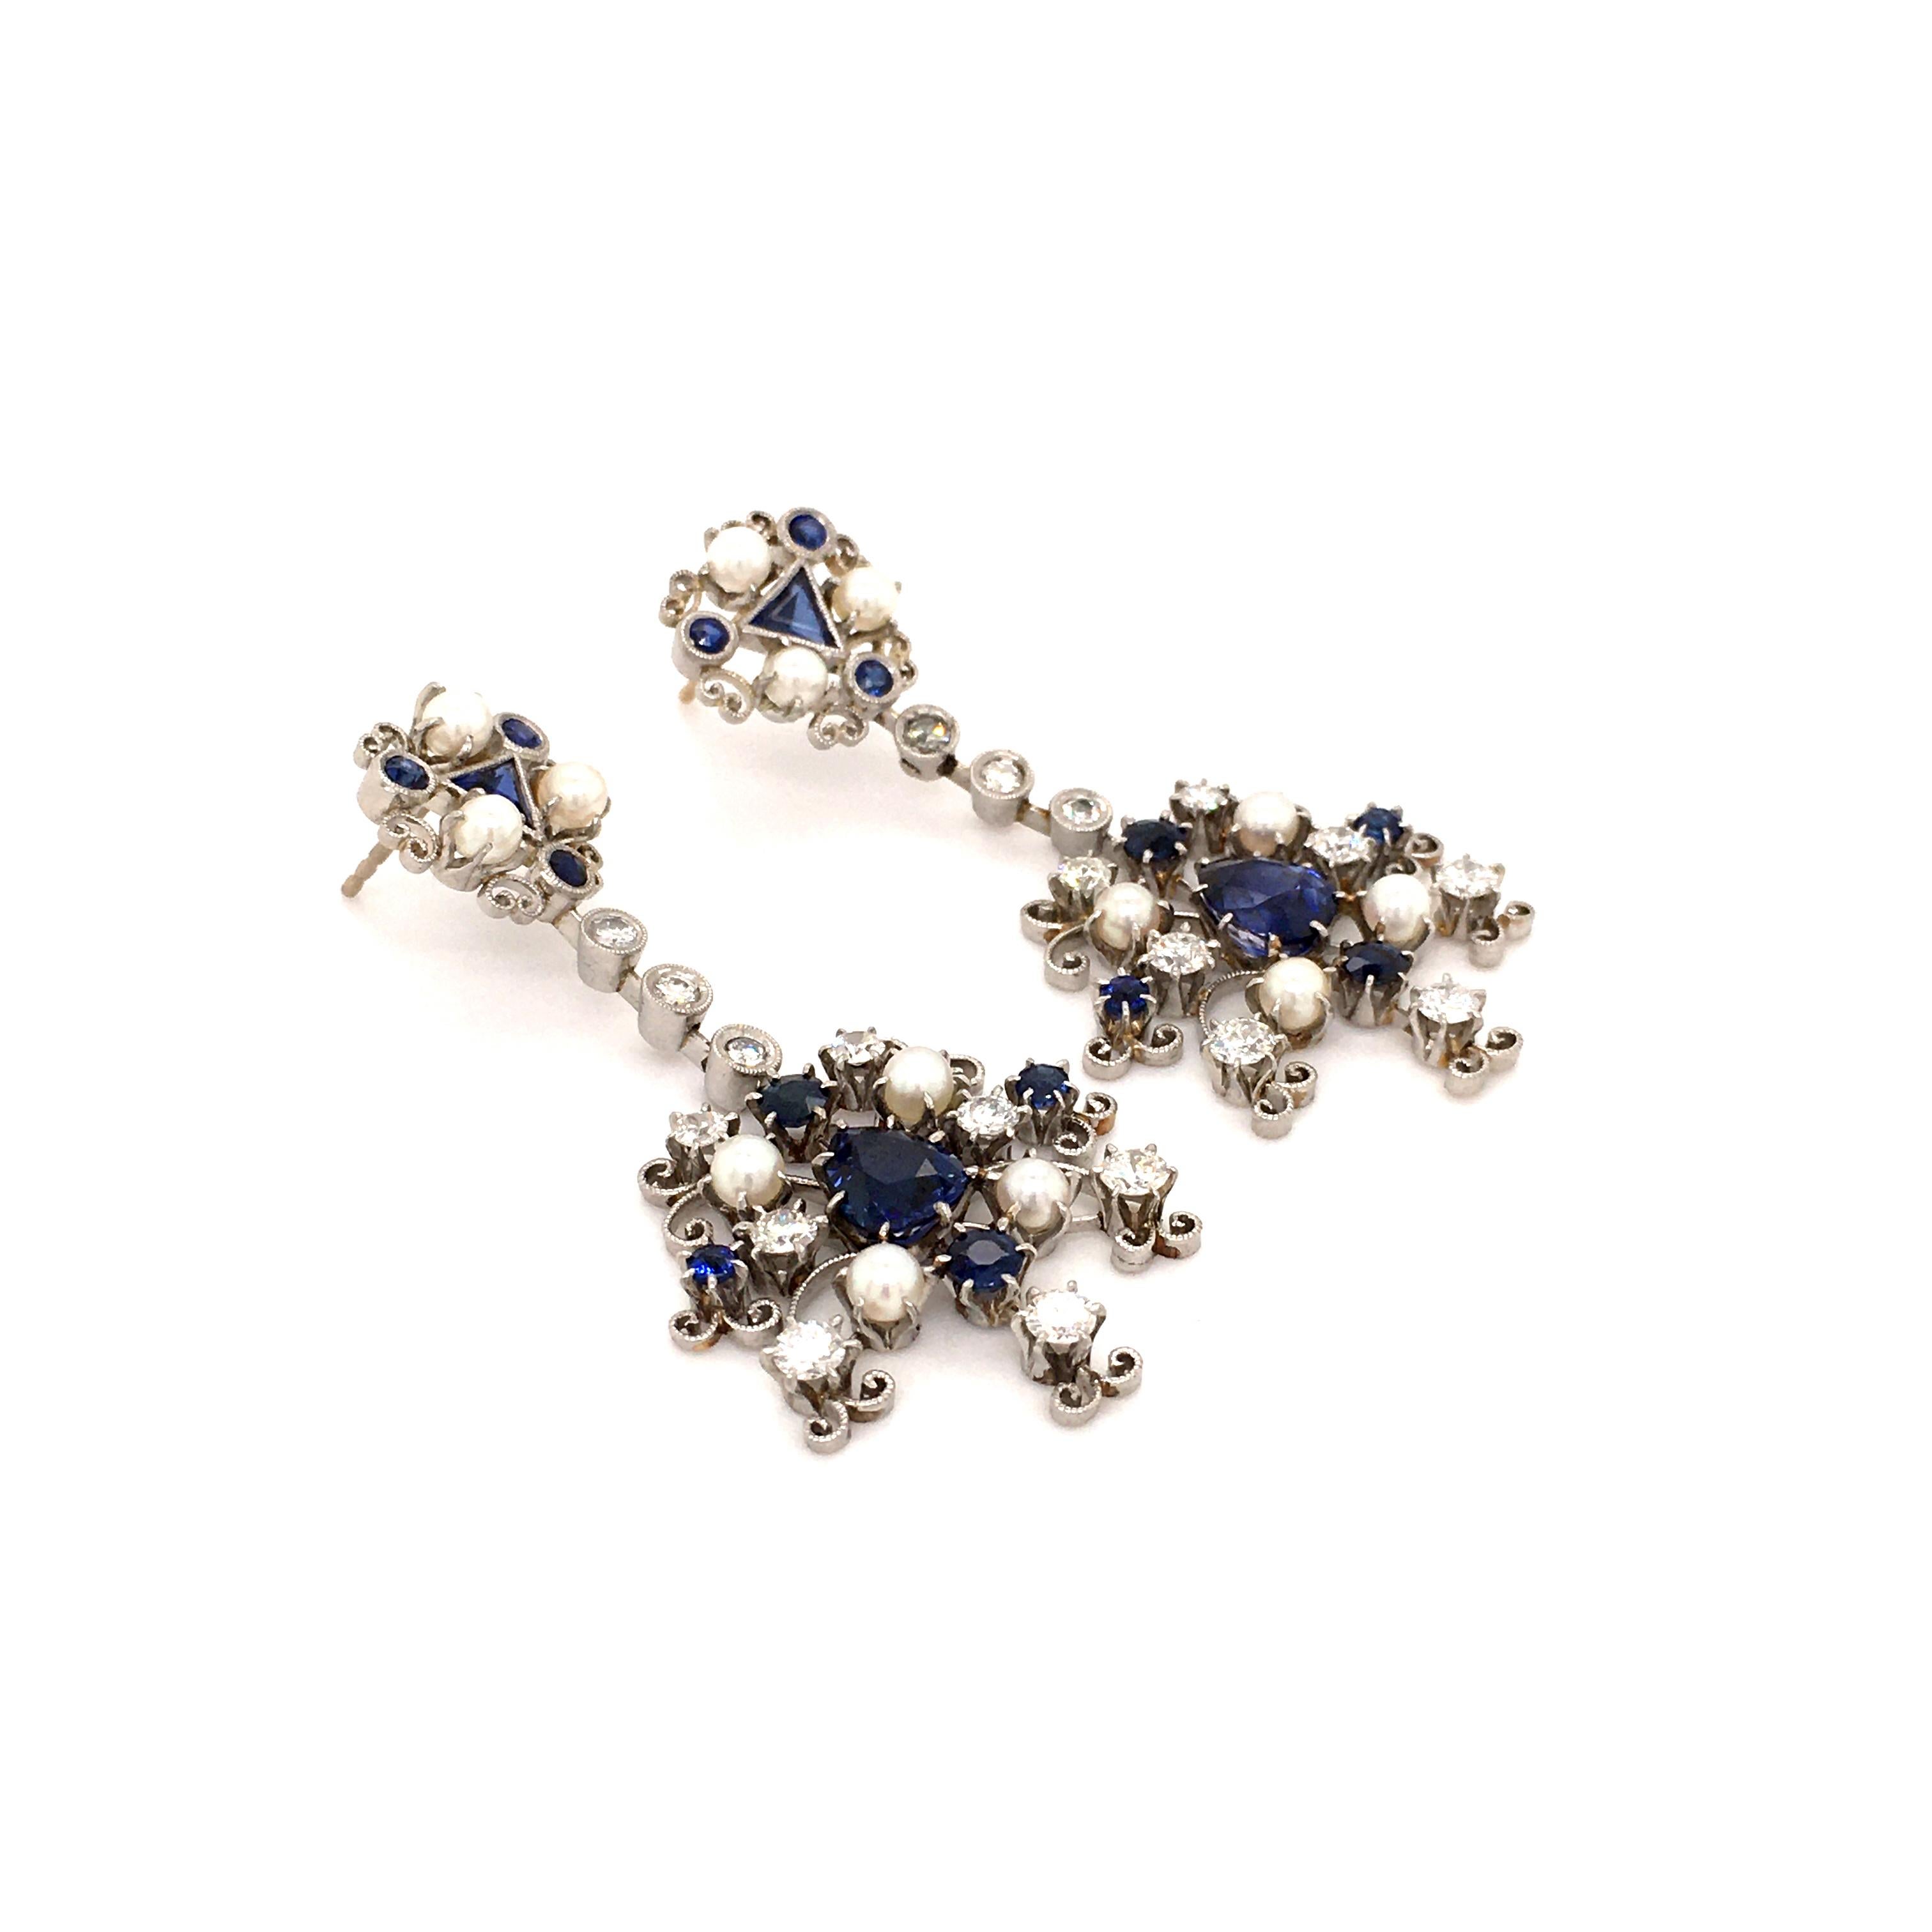 Women's or Men's Platinum Earstuds with Sapphires, Diamonds, and Cultured Pearls